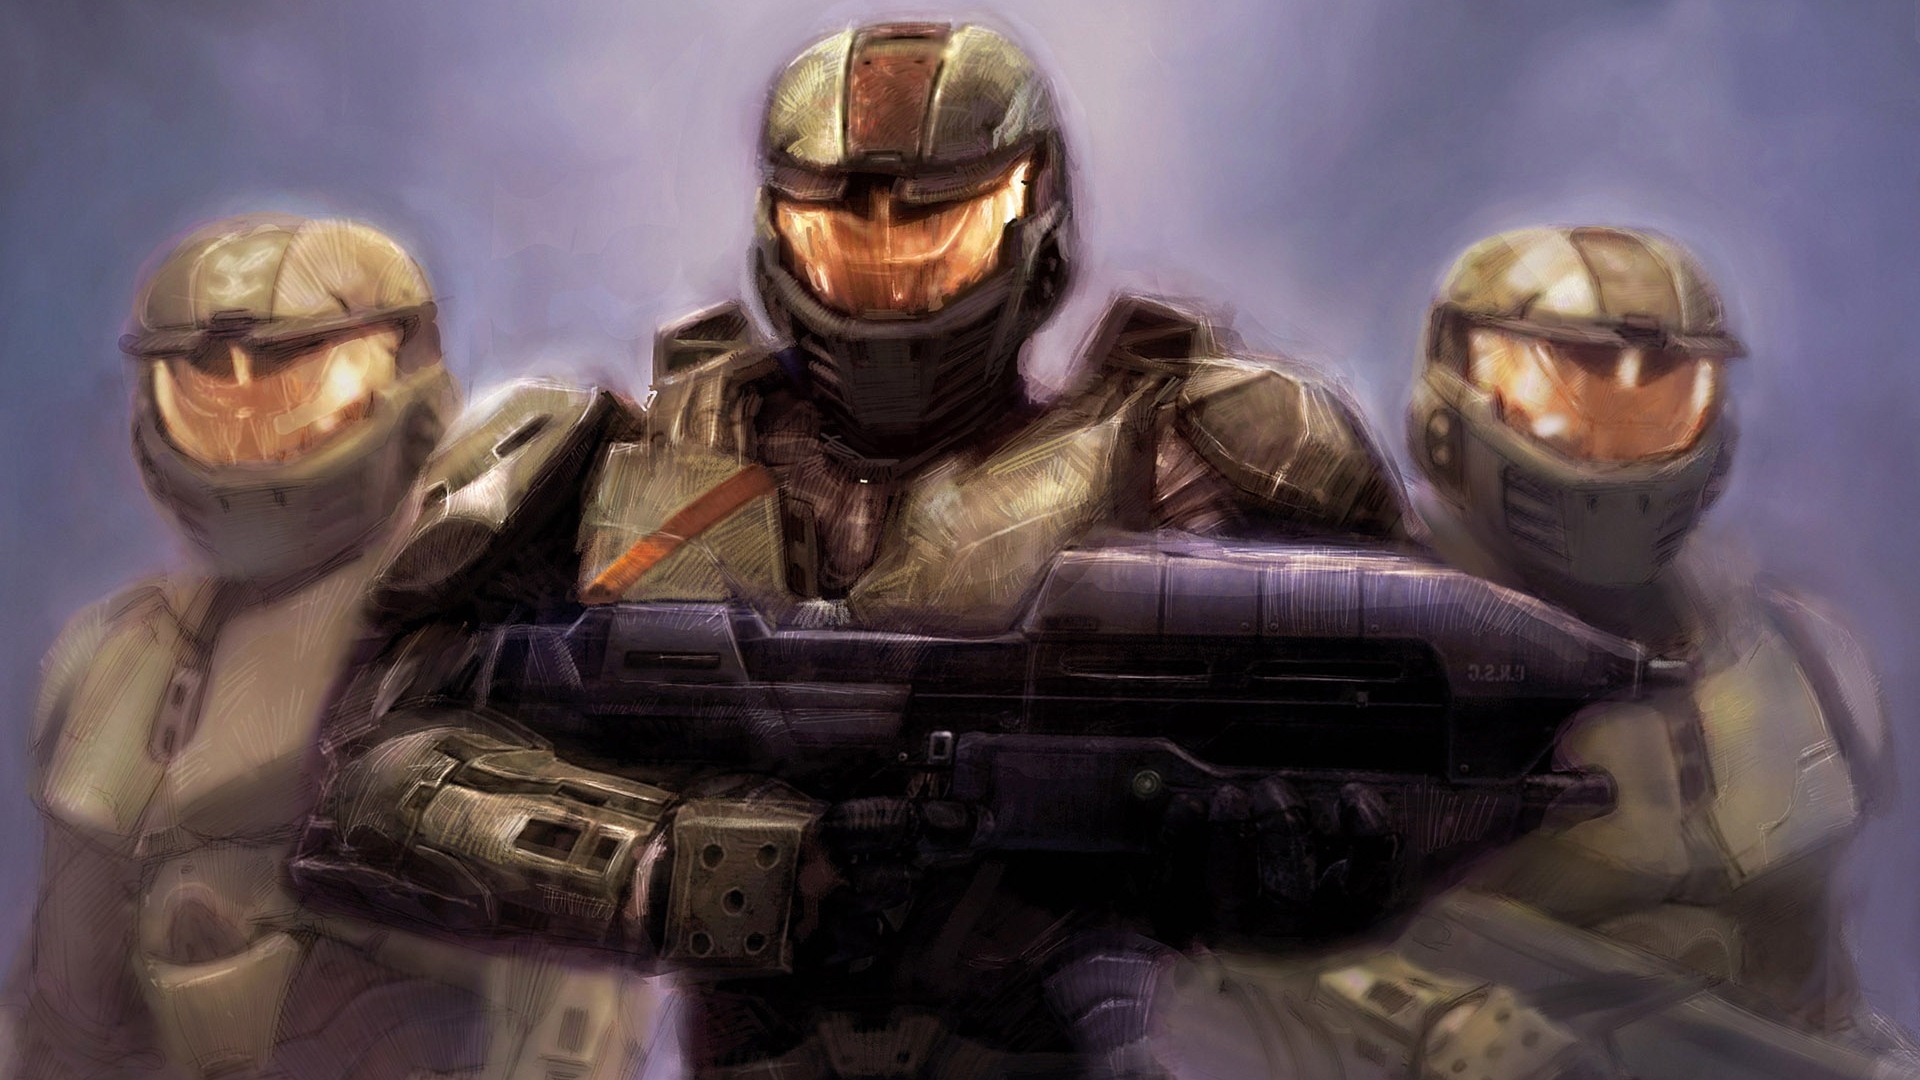 Halo game HD wallpapers #16 - 1920x1080